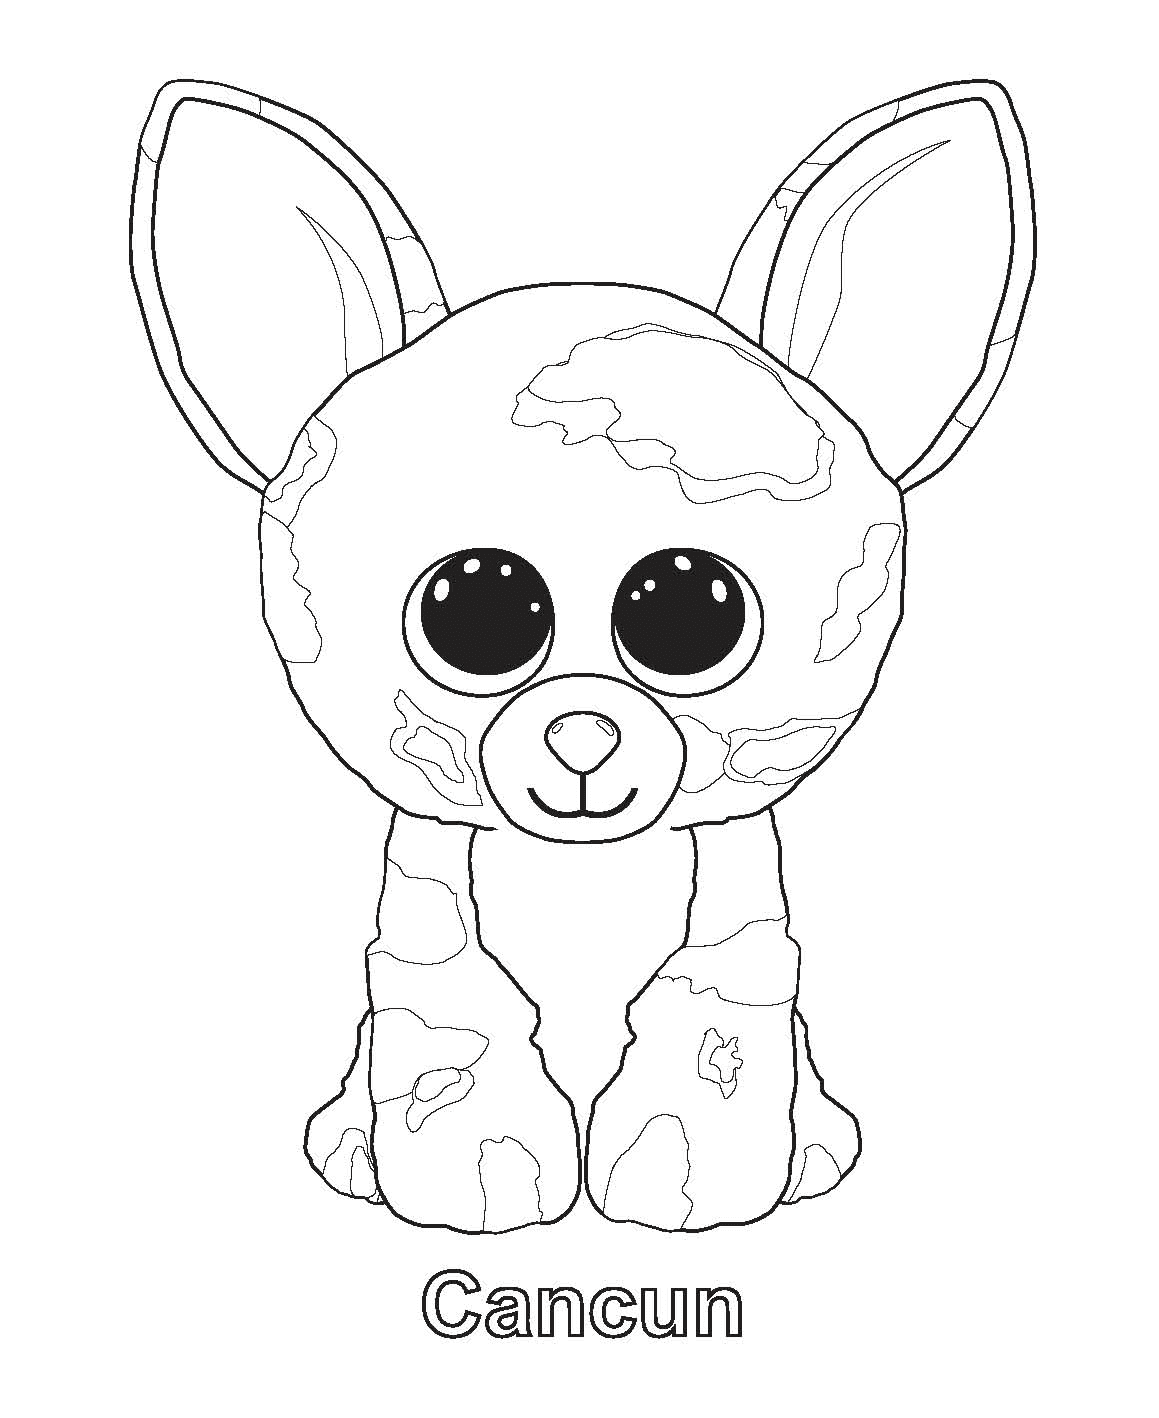 Cancun Beanie Boos Coloring Pages   Beanie Boos Coloring Pages ...